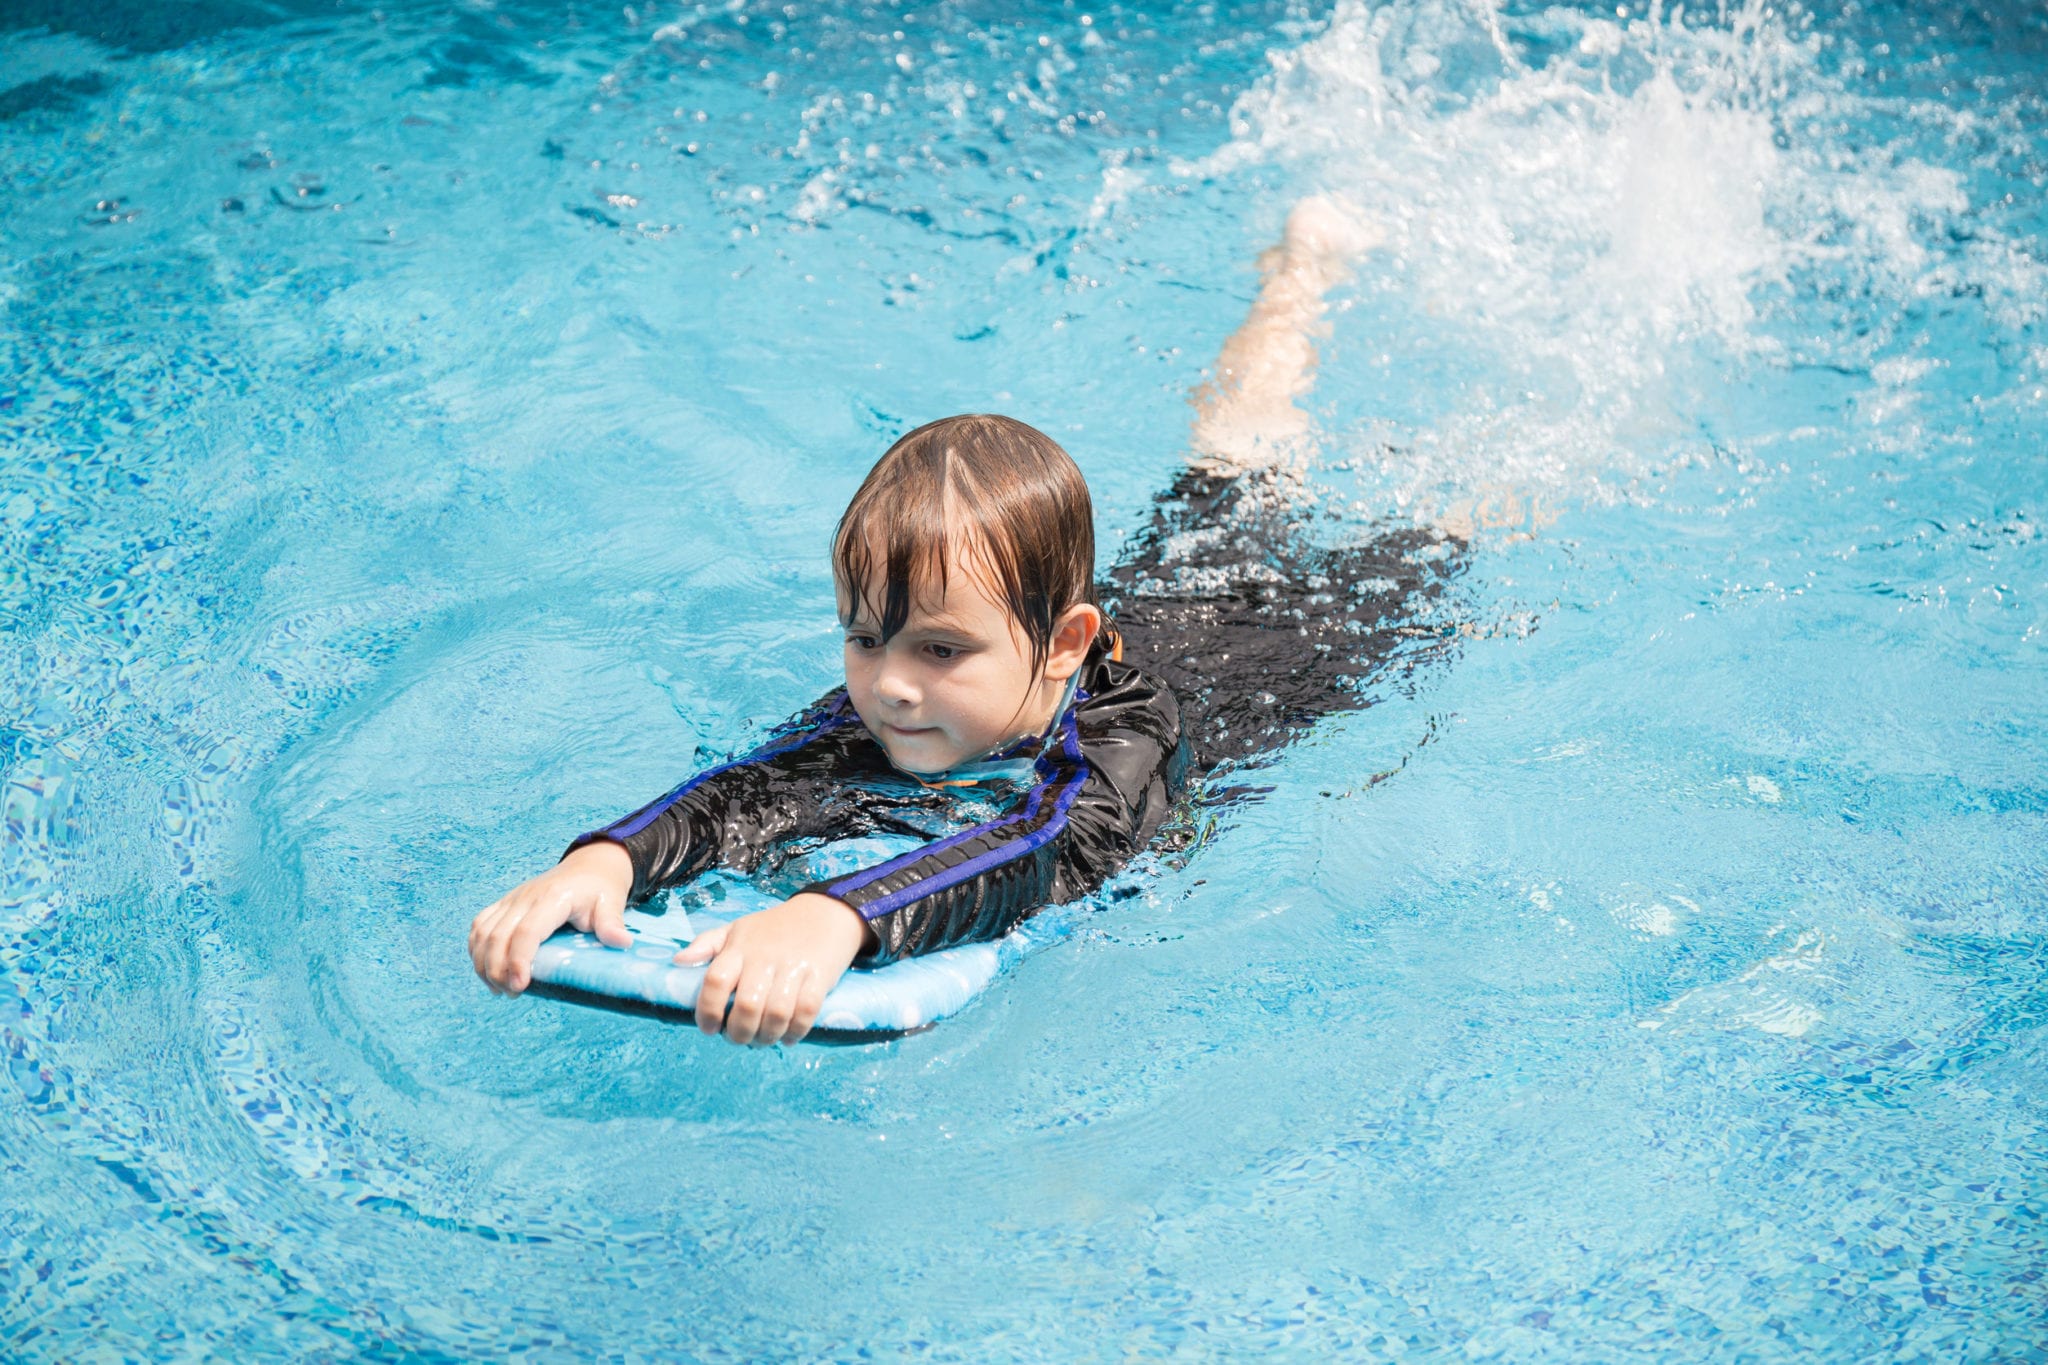 Florida Parents: CPSC Reports Increase in Child Drownings in 2020